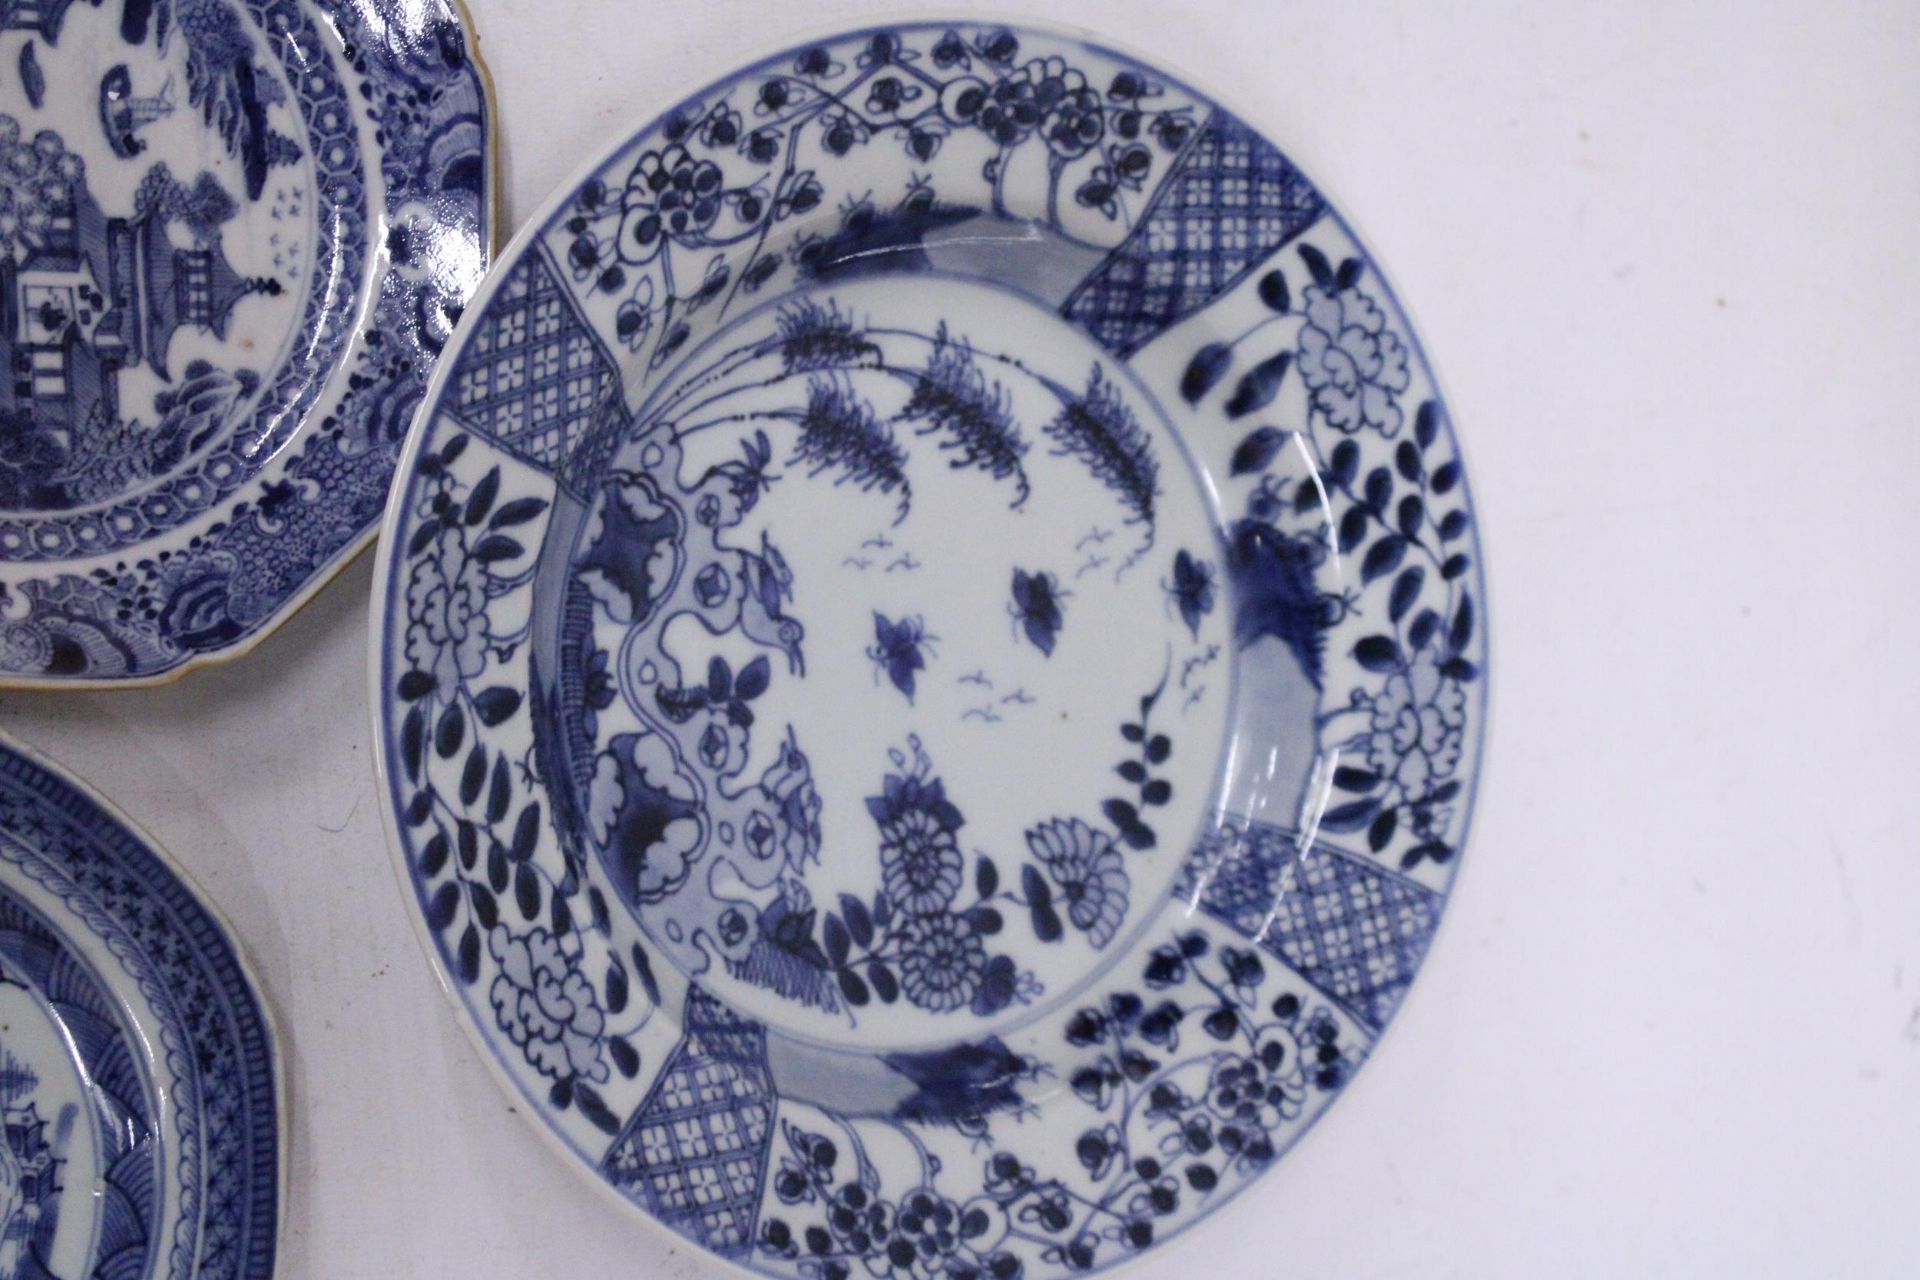 A COLLECTION OF CHINESE BLUE AND WHITE PORCELAIN TO INCLUDE A SMALL VASE, BOWL, PLATES, TEACUP ON - Image 5 of 5